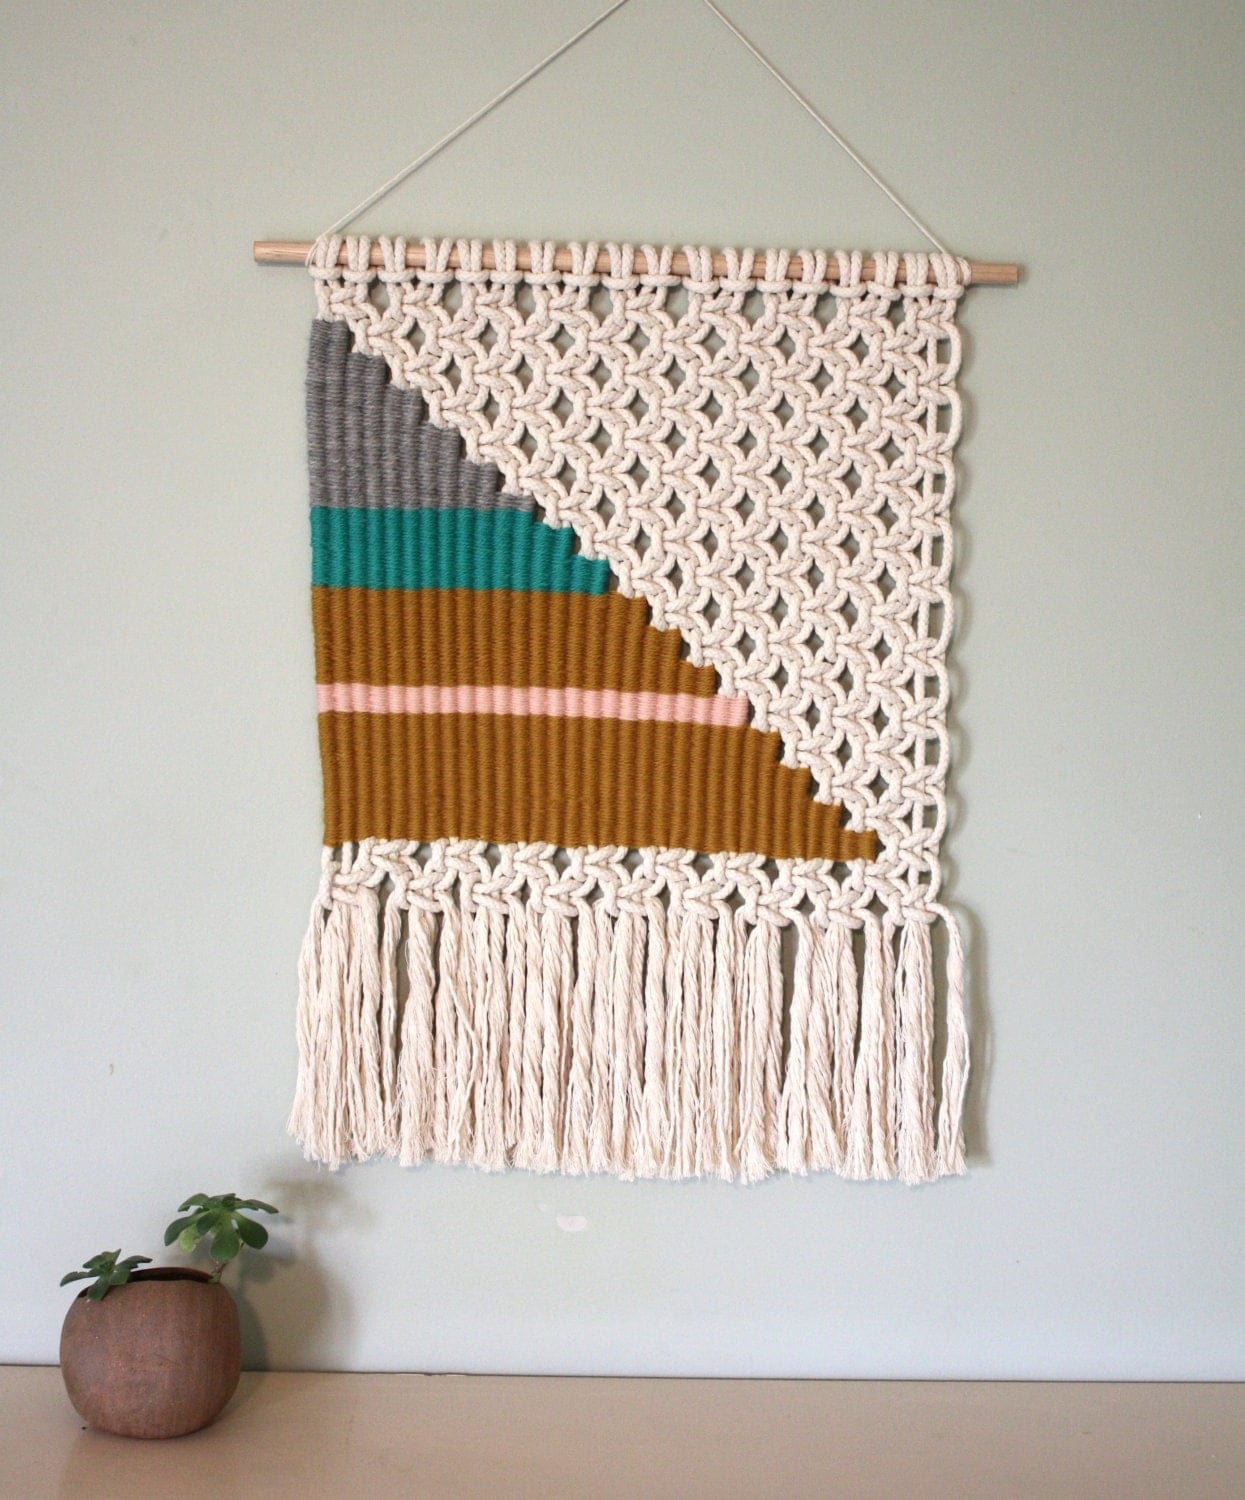 Woven Macrame Wall Hanging / Large Triangle